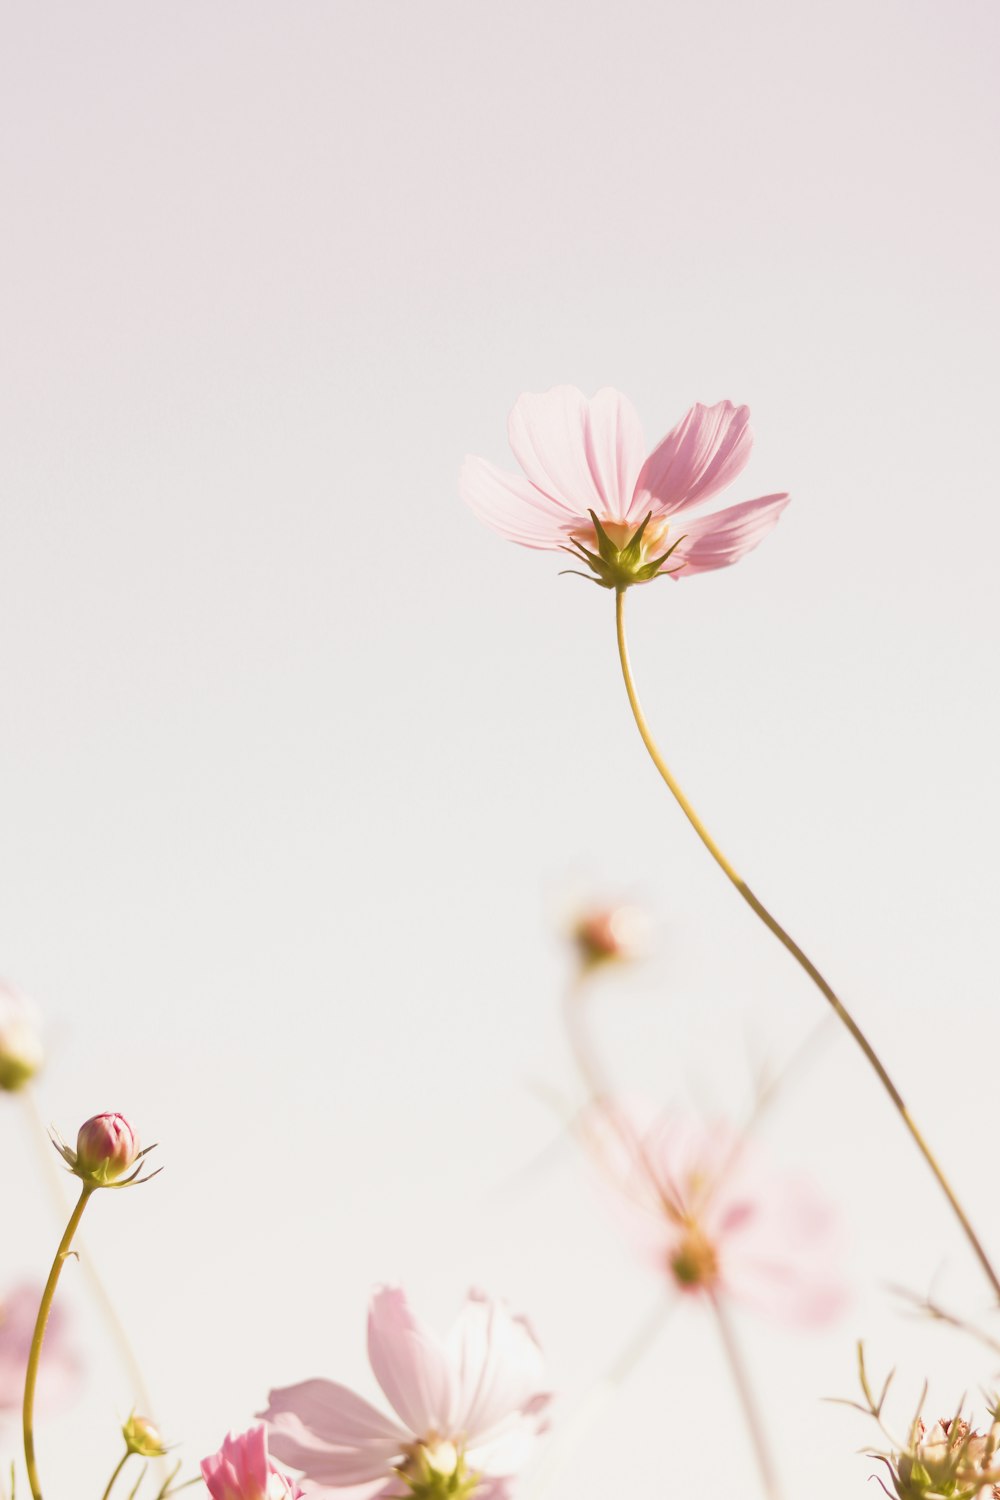 500+ Flower Pictures [HD] | Download Free Images on Unsplash